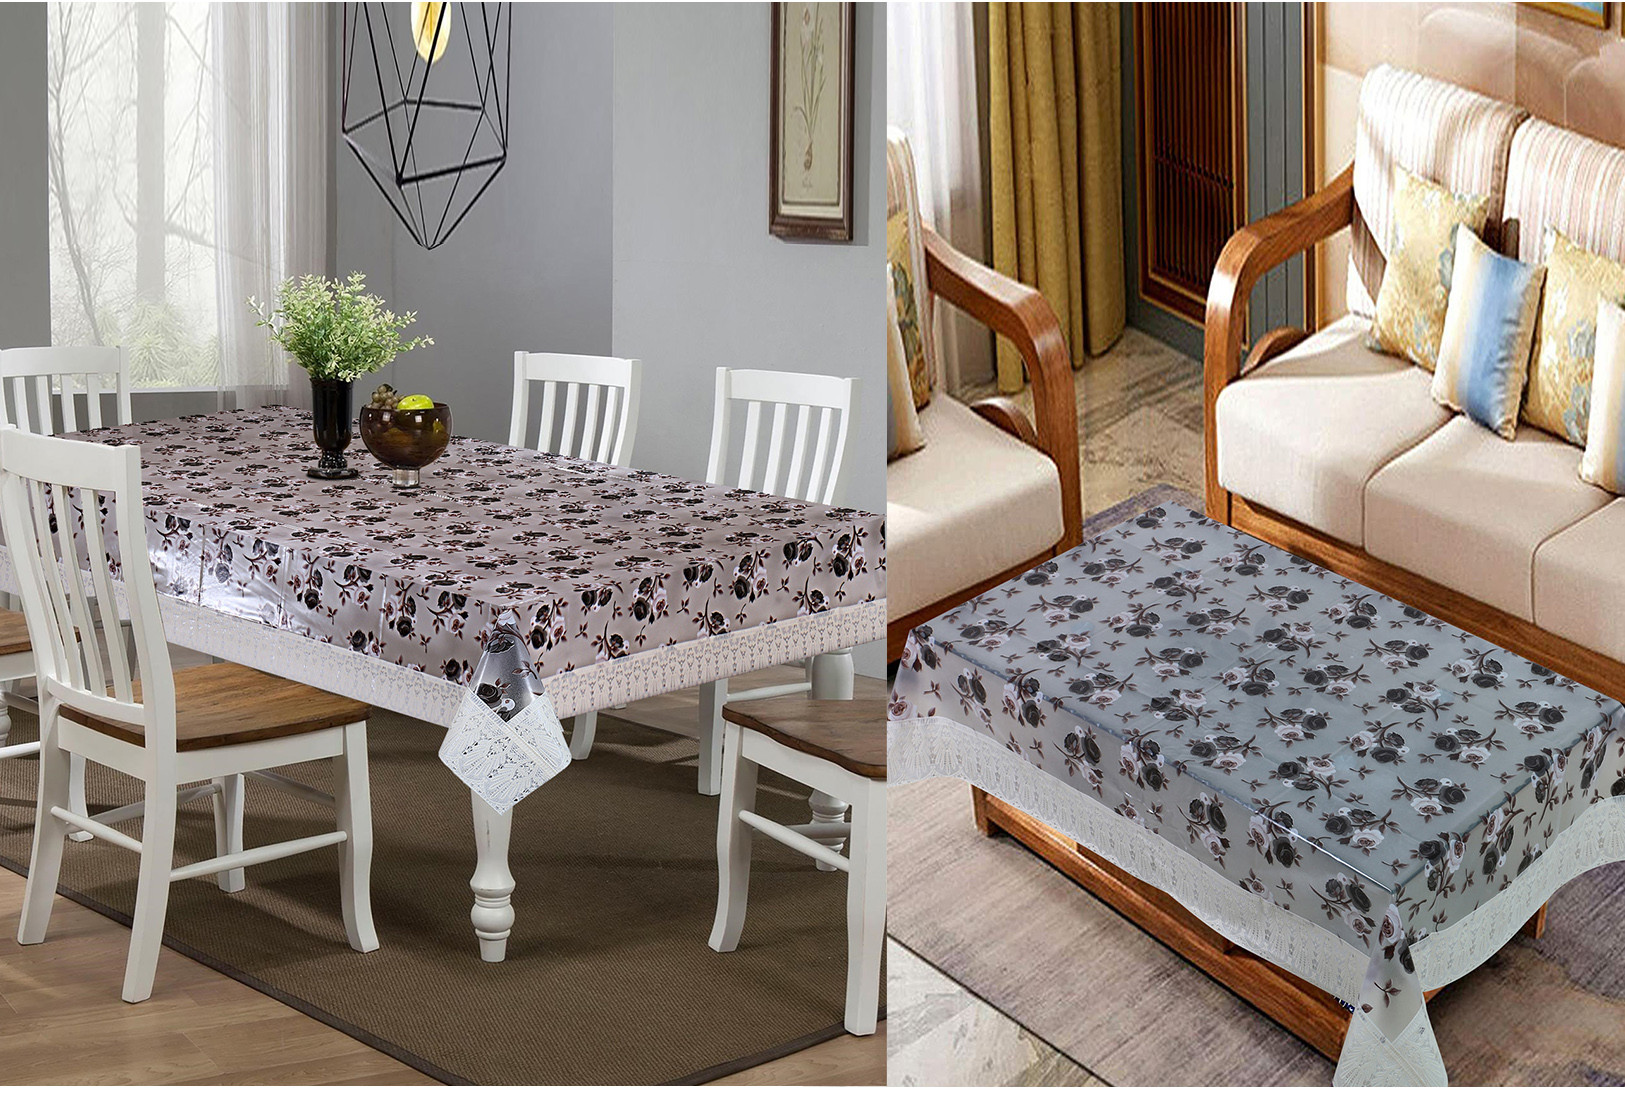 Kuber Industries Rose Design Waterproof Attractive Dining Table Cover & Center Table Cover for Home Decoration,(Cream)